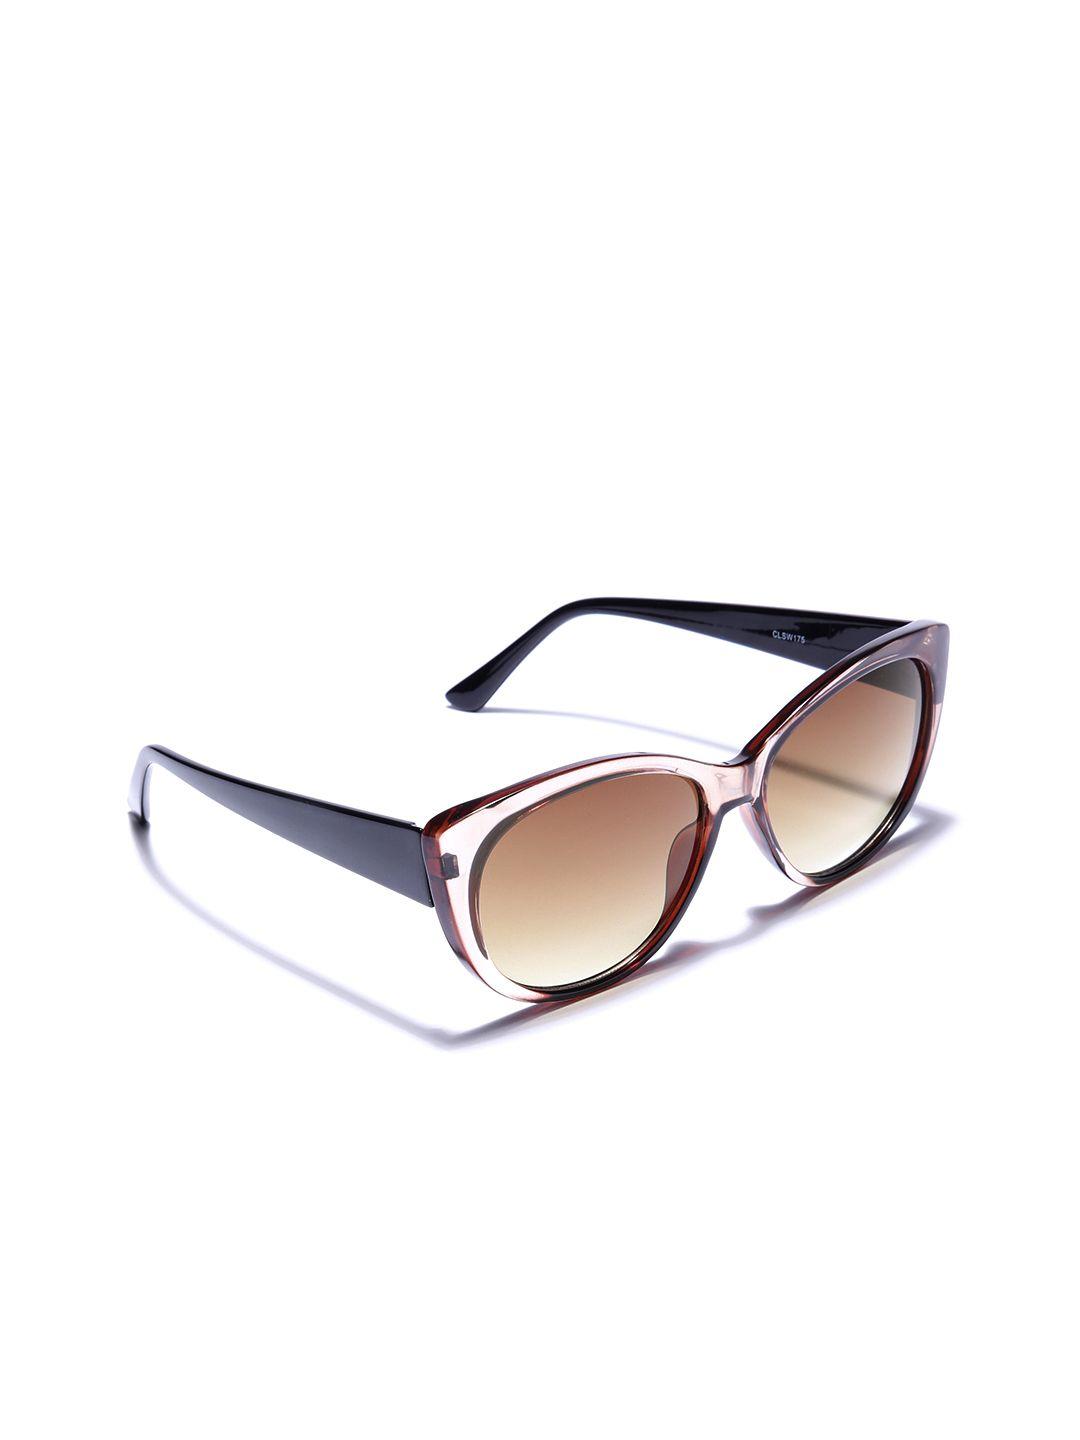 carlton-london-women-rectangle-sunglasses-with-uv-protected-lens---clsw175